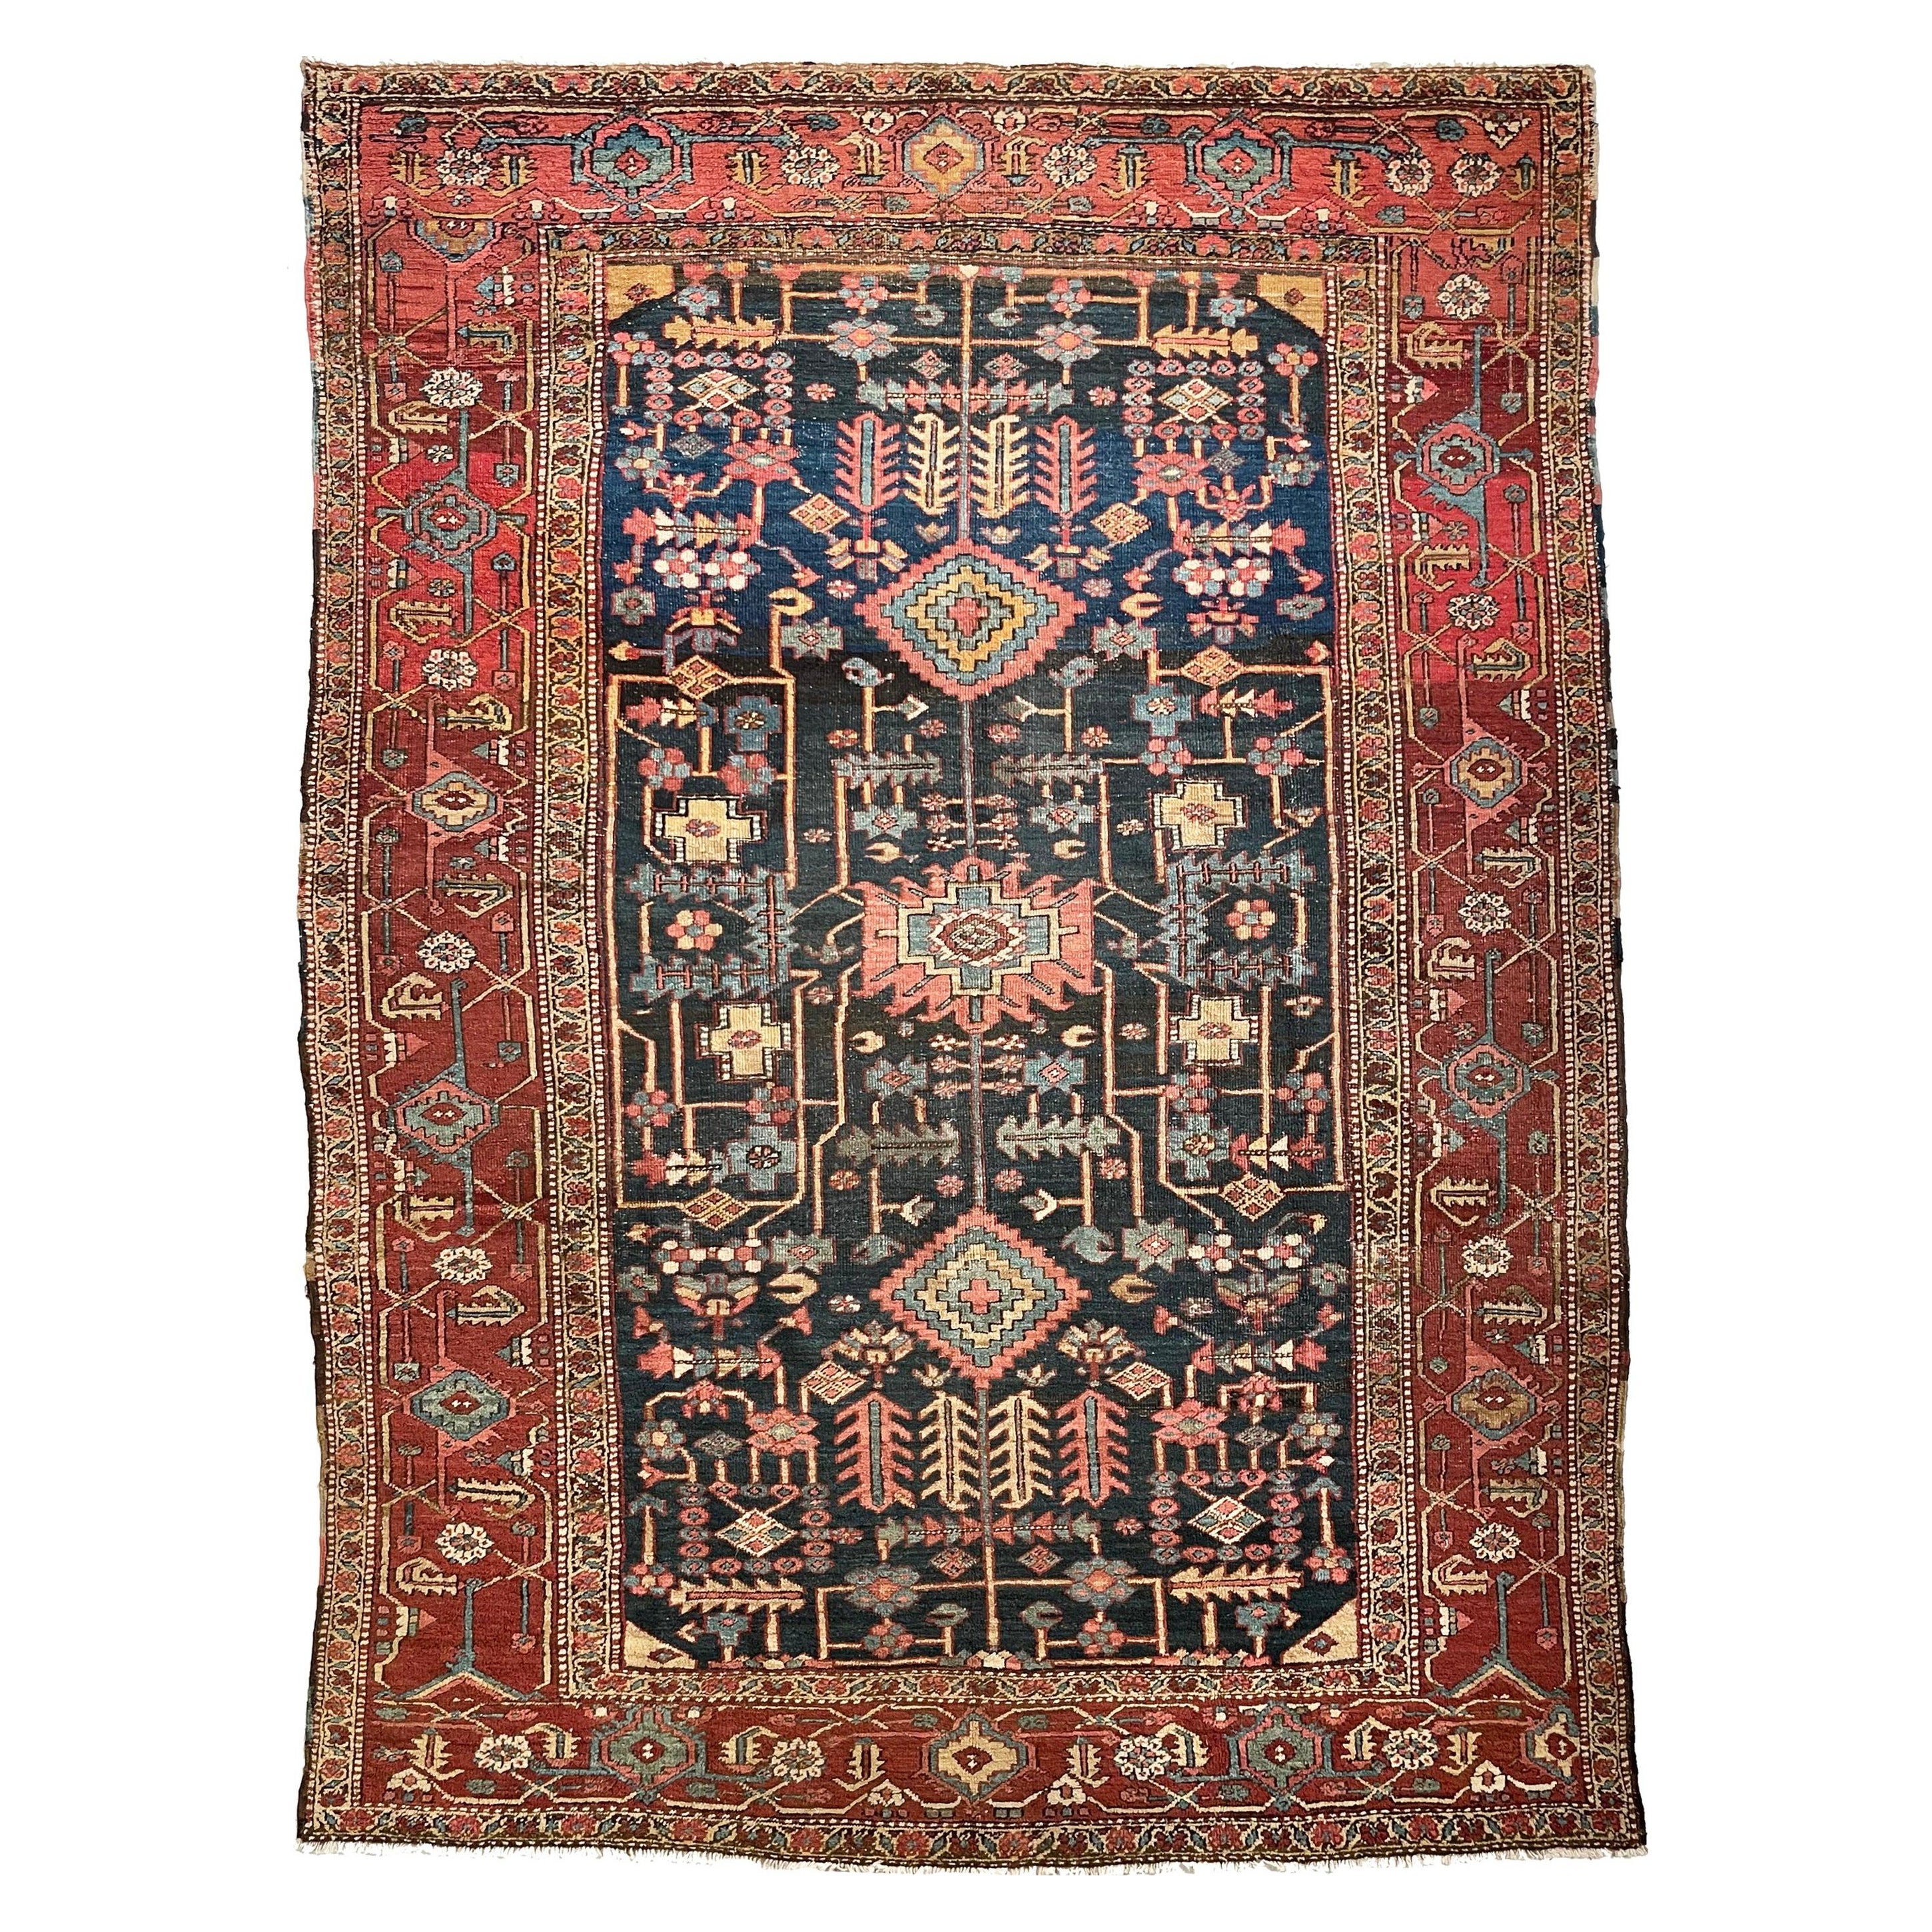 Antique Rare Design with Color Palette 1-of-1 Persian Heriz Rug, circa 1920's For Sale